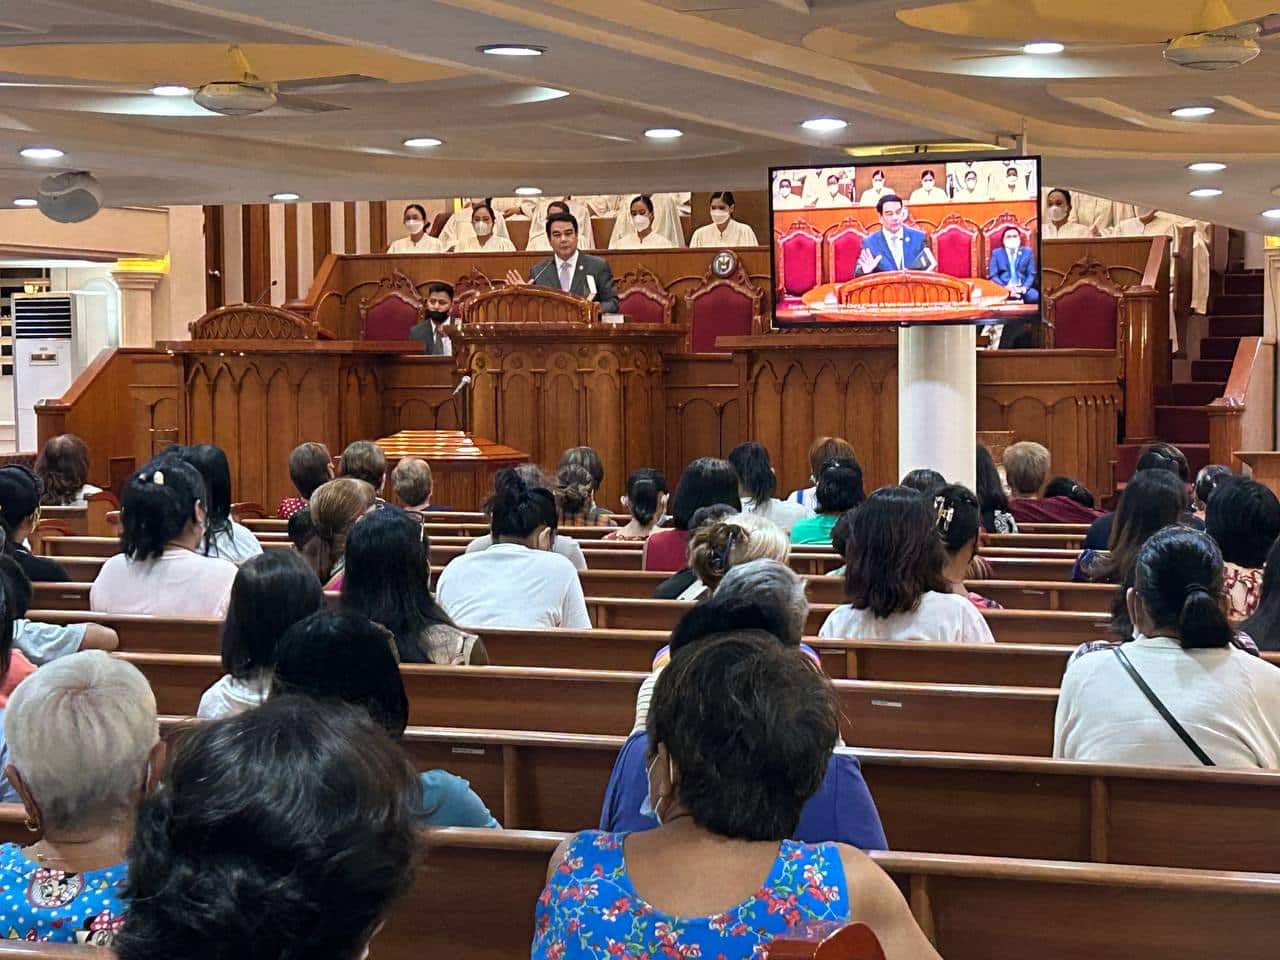 Evangelical mission in Washington, Manila draws hundreds of guests